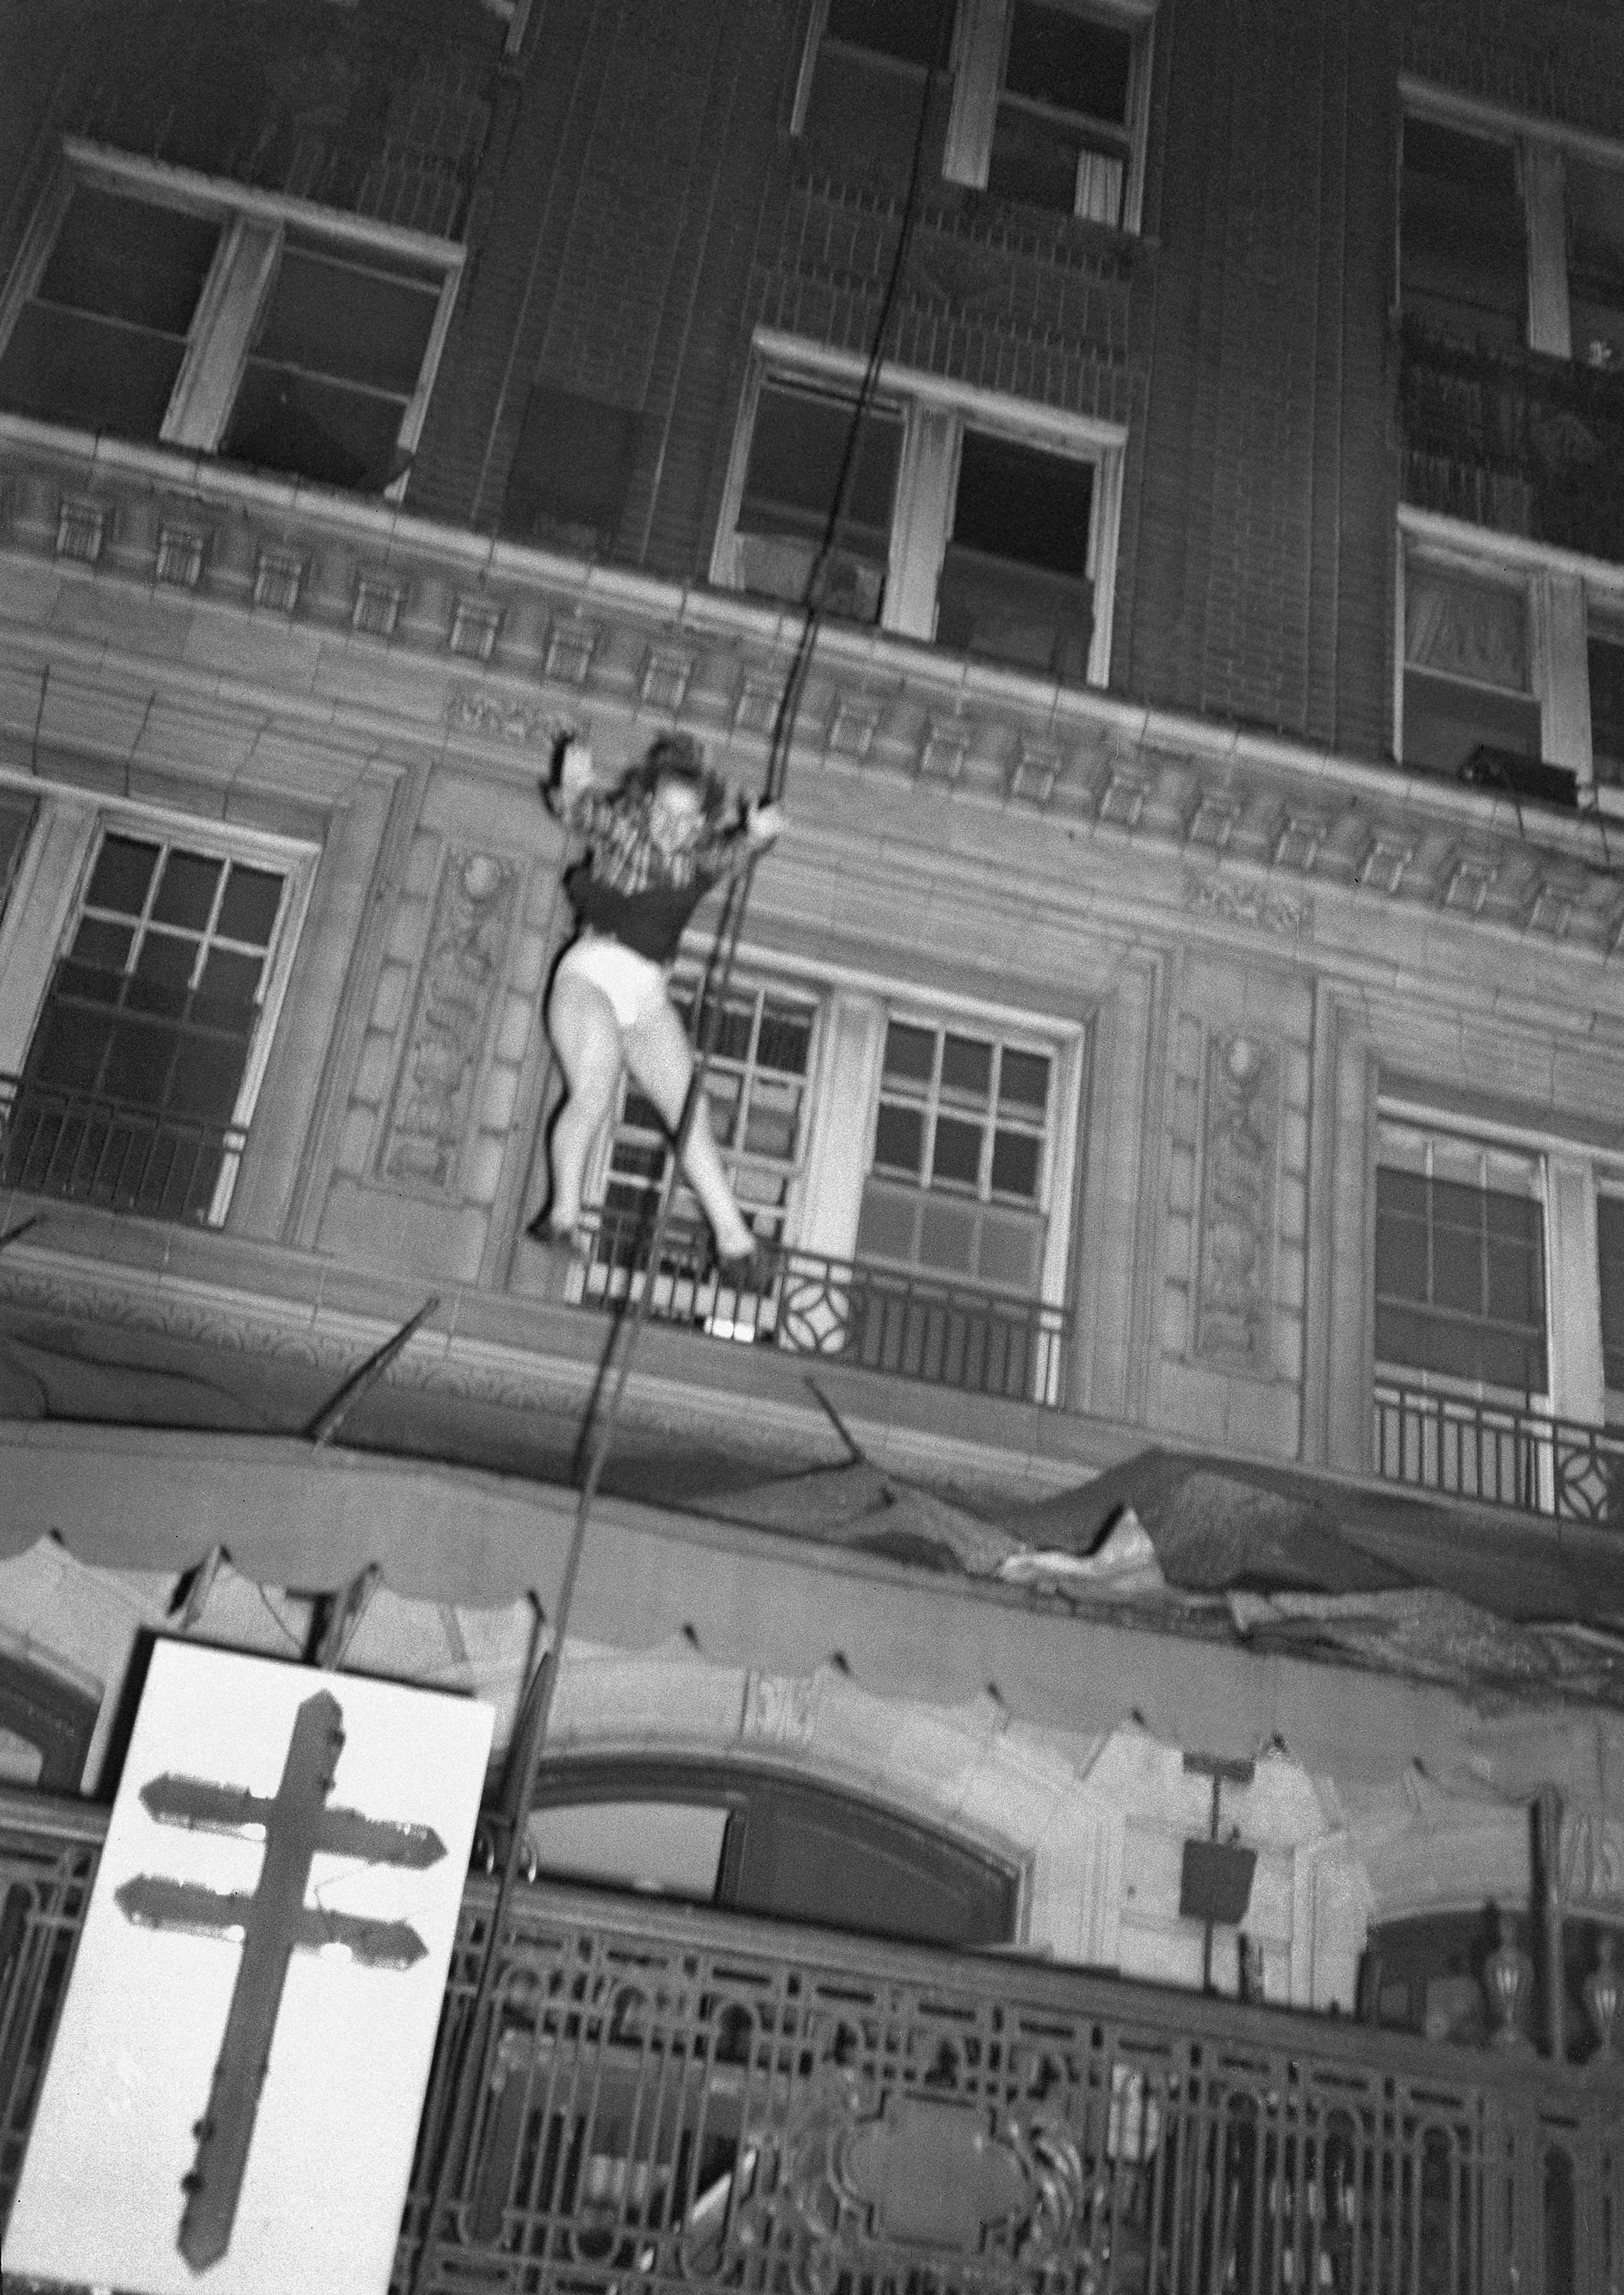 A woman plunges from the upper floors of Atlanta’s Winecoff Hotel as a fire traps many occupants, Dec. 7, 1946. The woman was reported to have survived after her fall was broken by part of the hotel marquee. The fire killed 119 people, including he hotel’s owners. (Arnold Hardy via AP) 